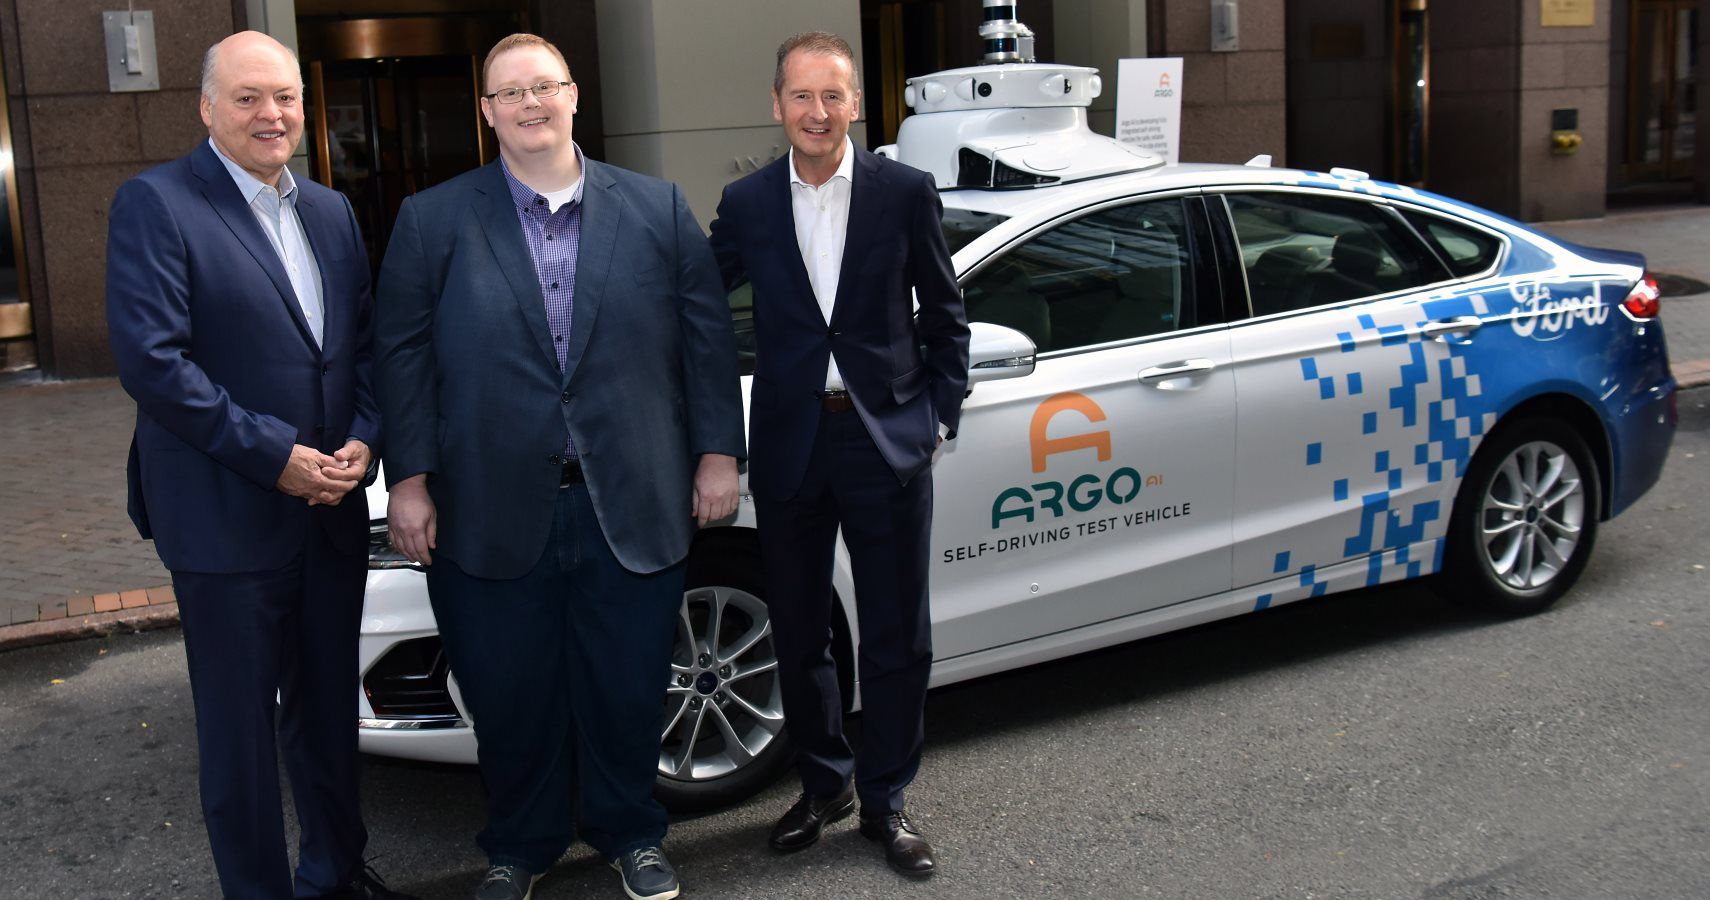 Ford President and CEO Jim Hackett, Argo AI CEO Bryan Salesky and Volkswagen CEO Dr. Herbert Diess 